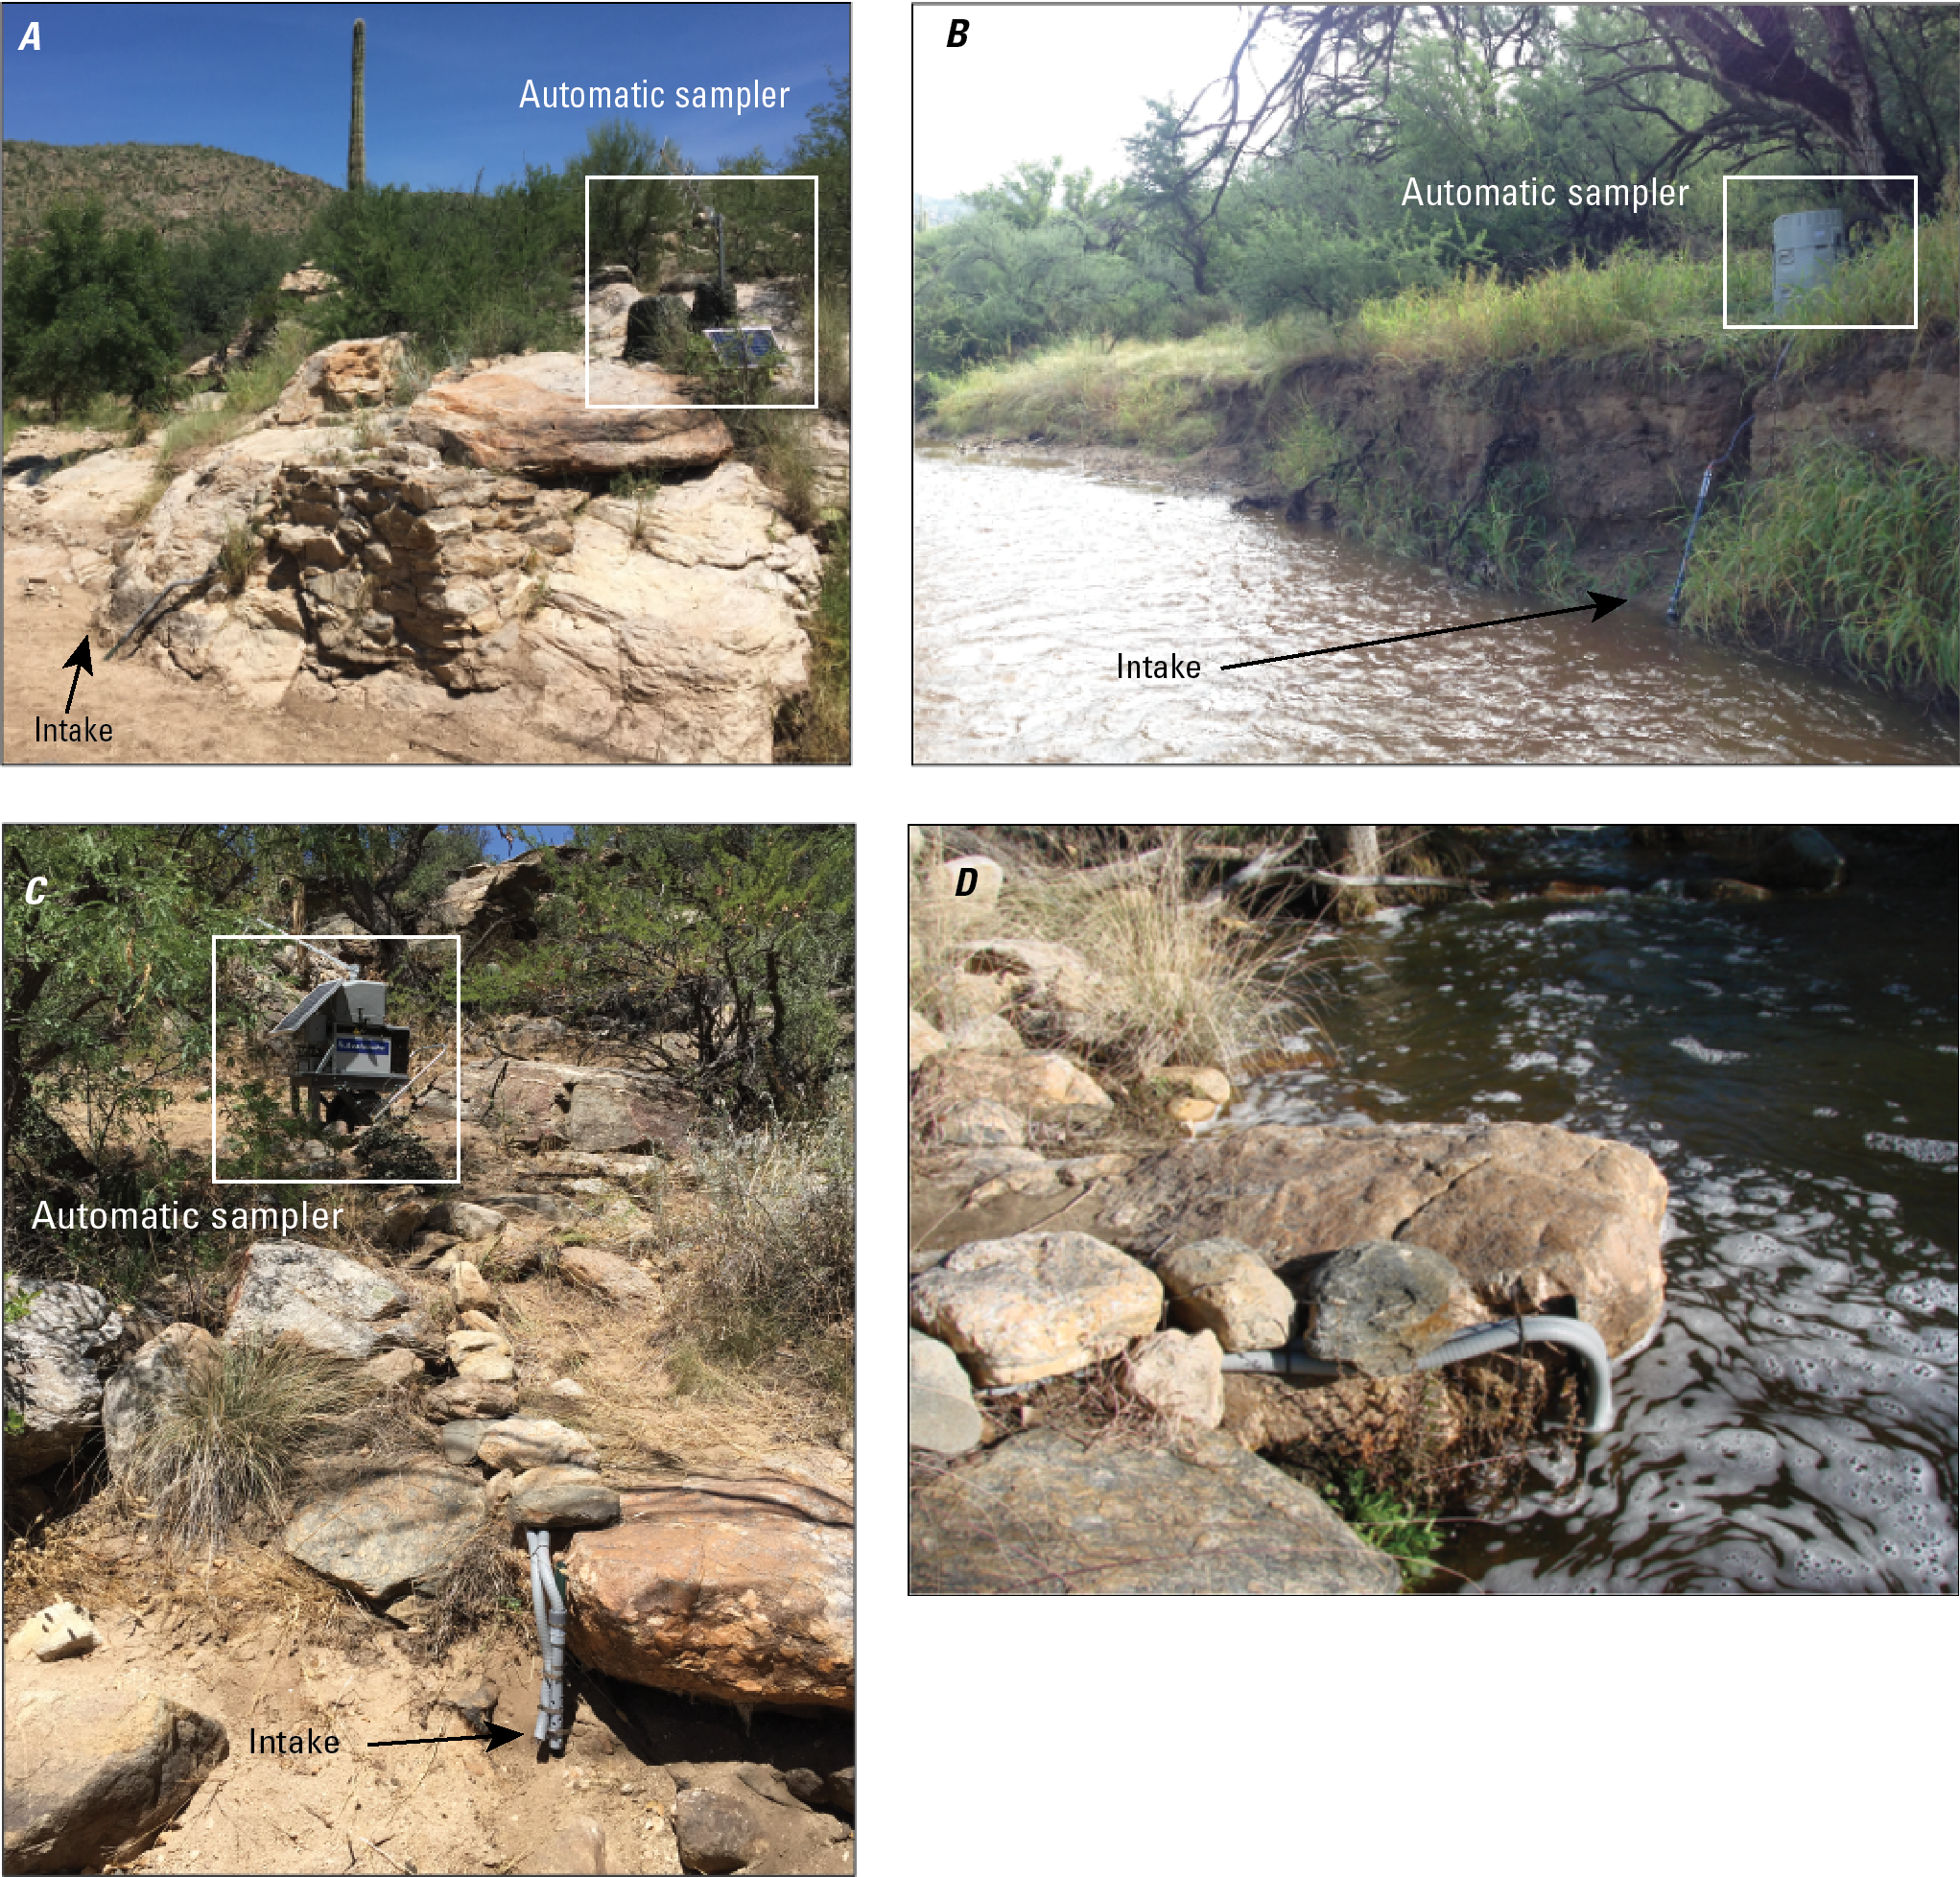 Photographs of automatic sampler installations in Box Canyon and Madrona Canyon watersheds
                        during dry and flood conditions.